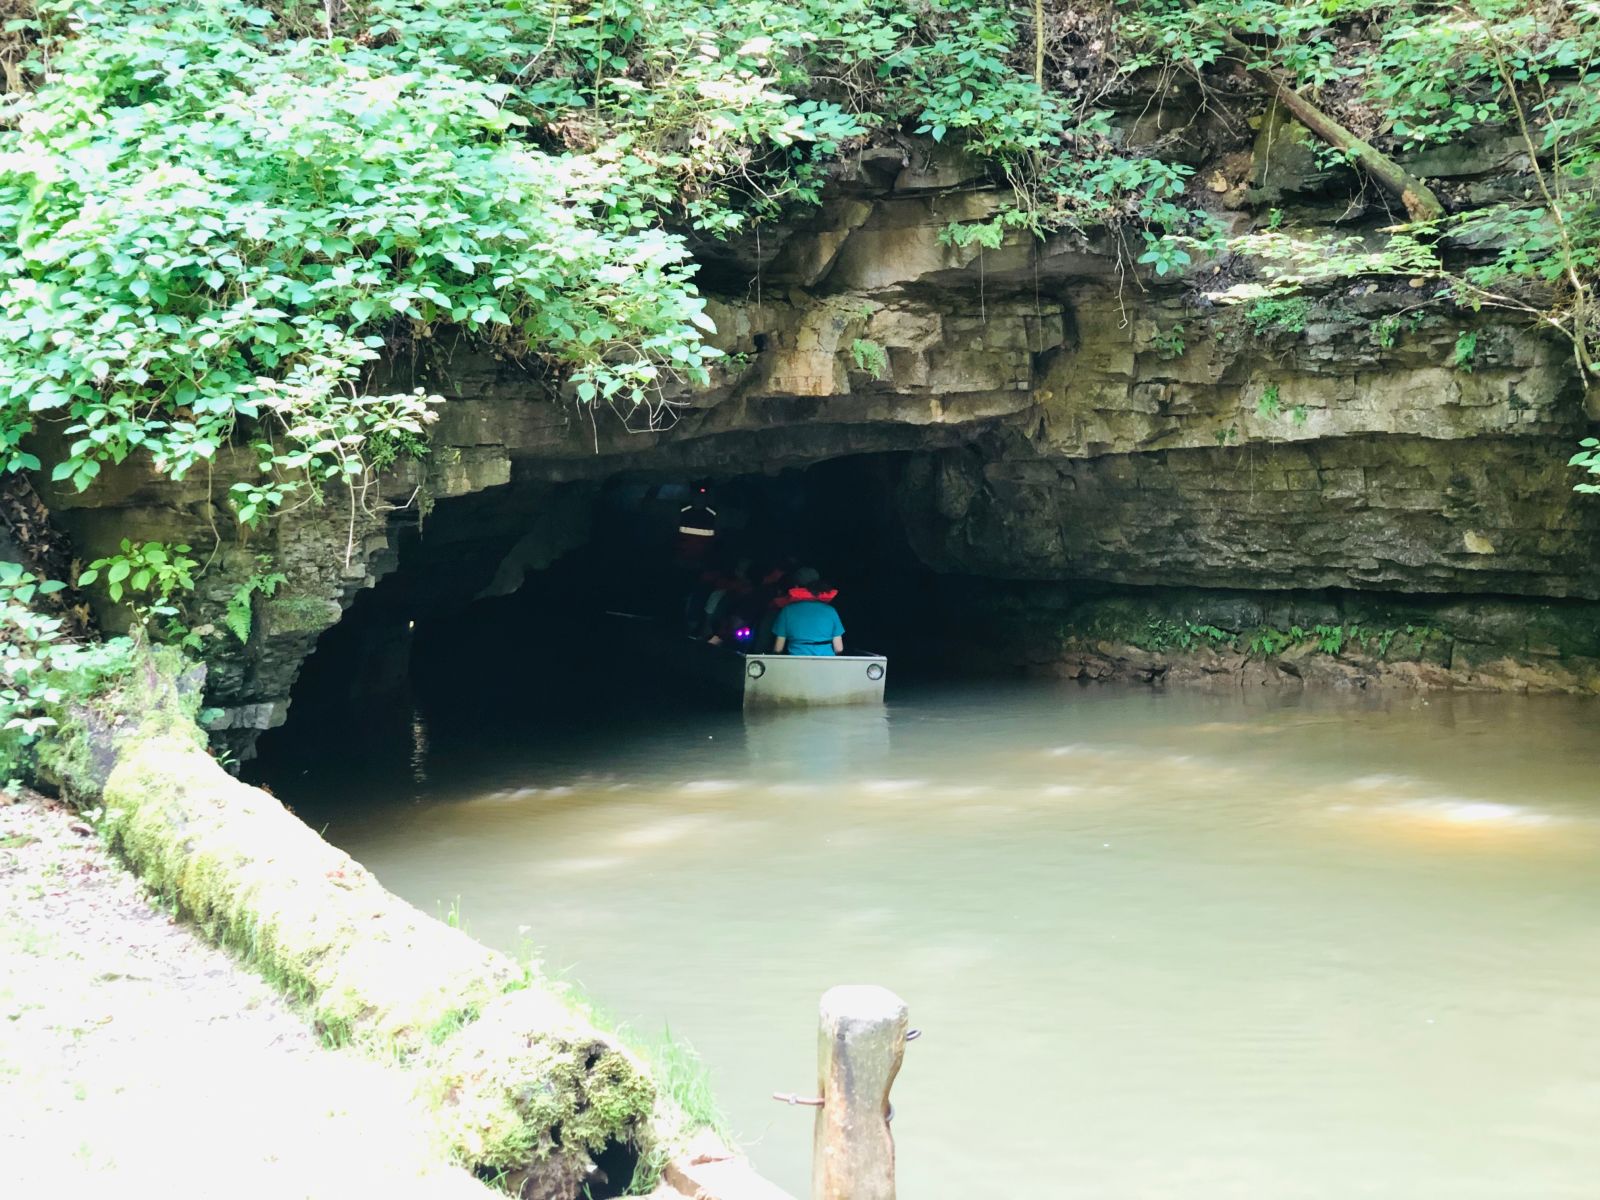 Spring Mill State Park includes a water tour of two caves. Regrettably I was too late to reserve a spot.